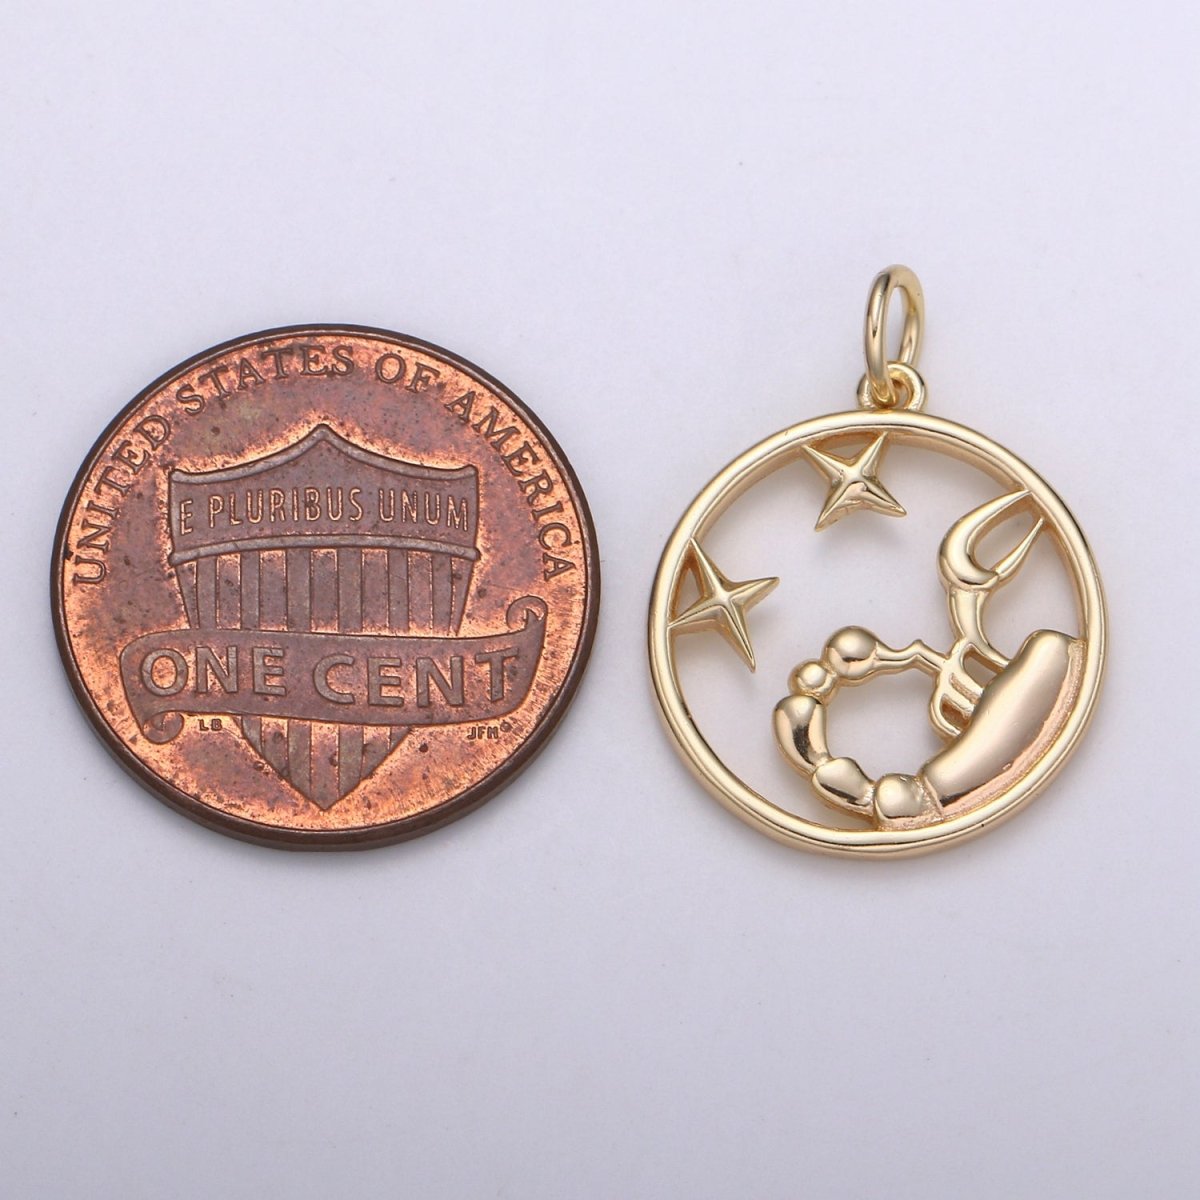 S925 Sterling Silver Zodiac Horoscope Gold Vermeil Open Round Charm | A-677-A-688 - DLUXCA